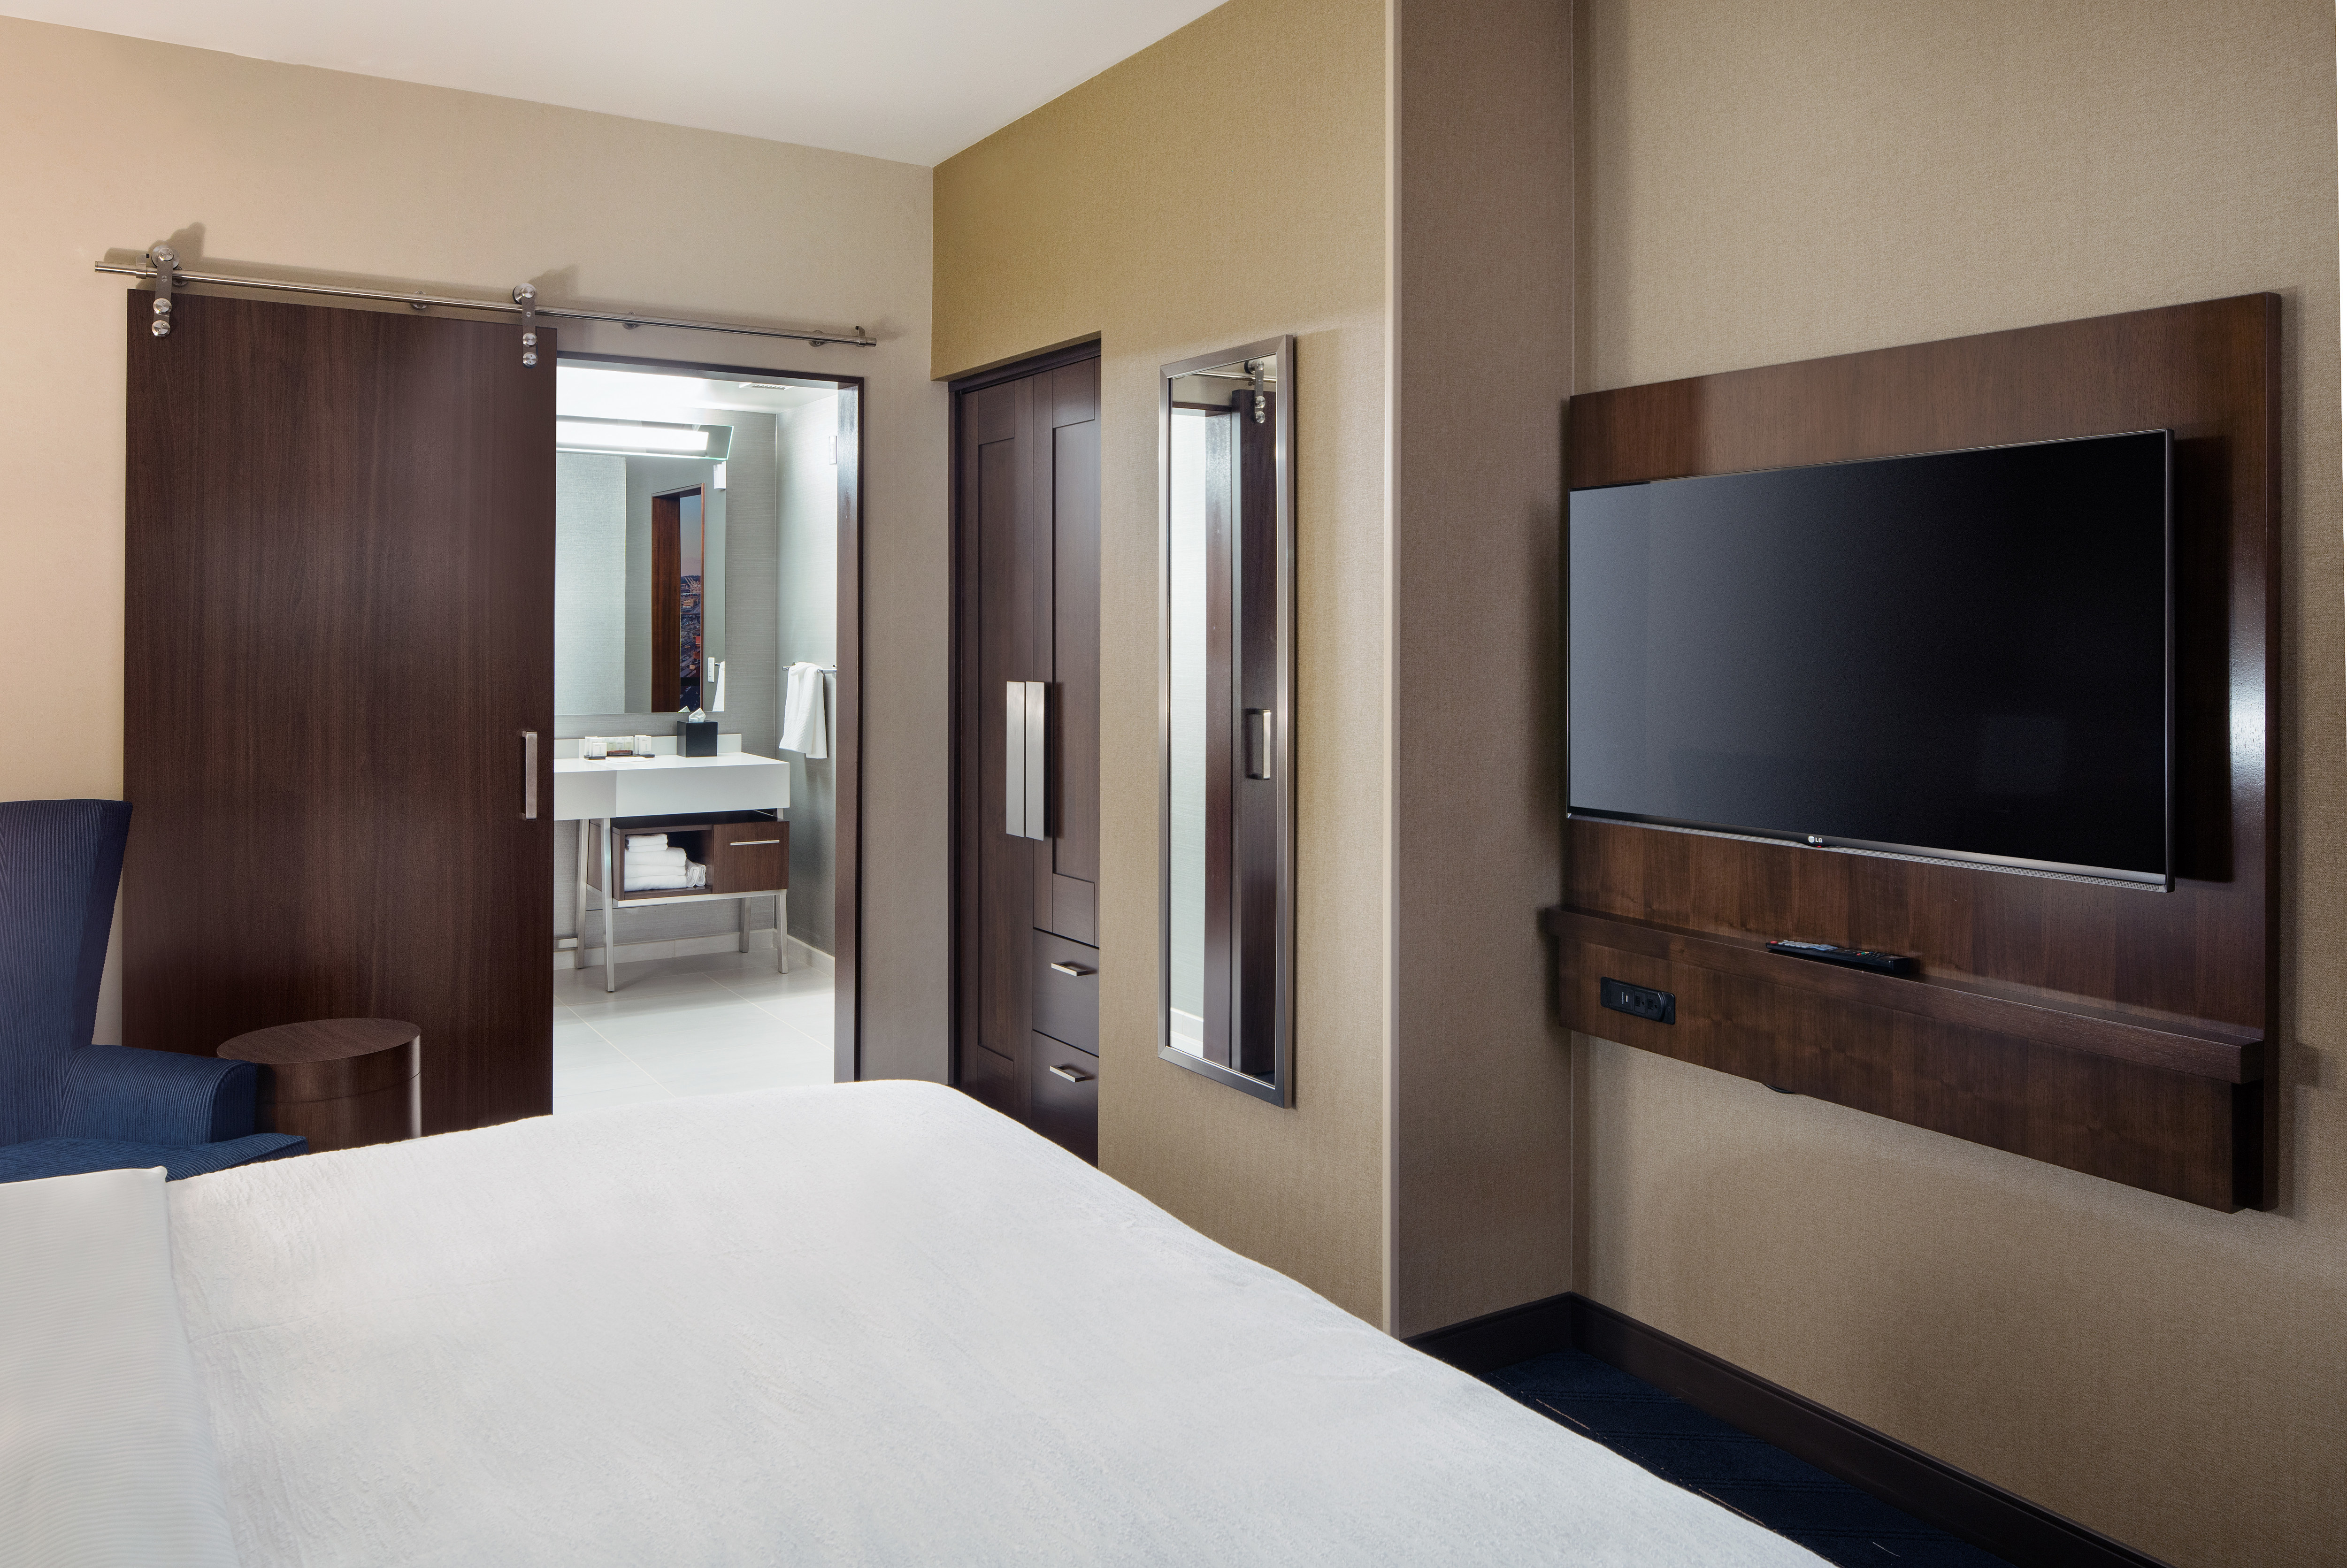 Bed- and Bathroom Area of Suite